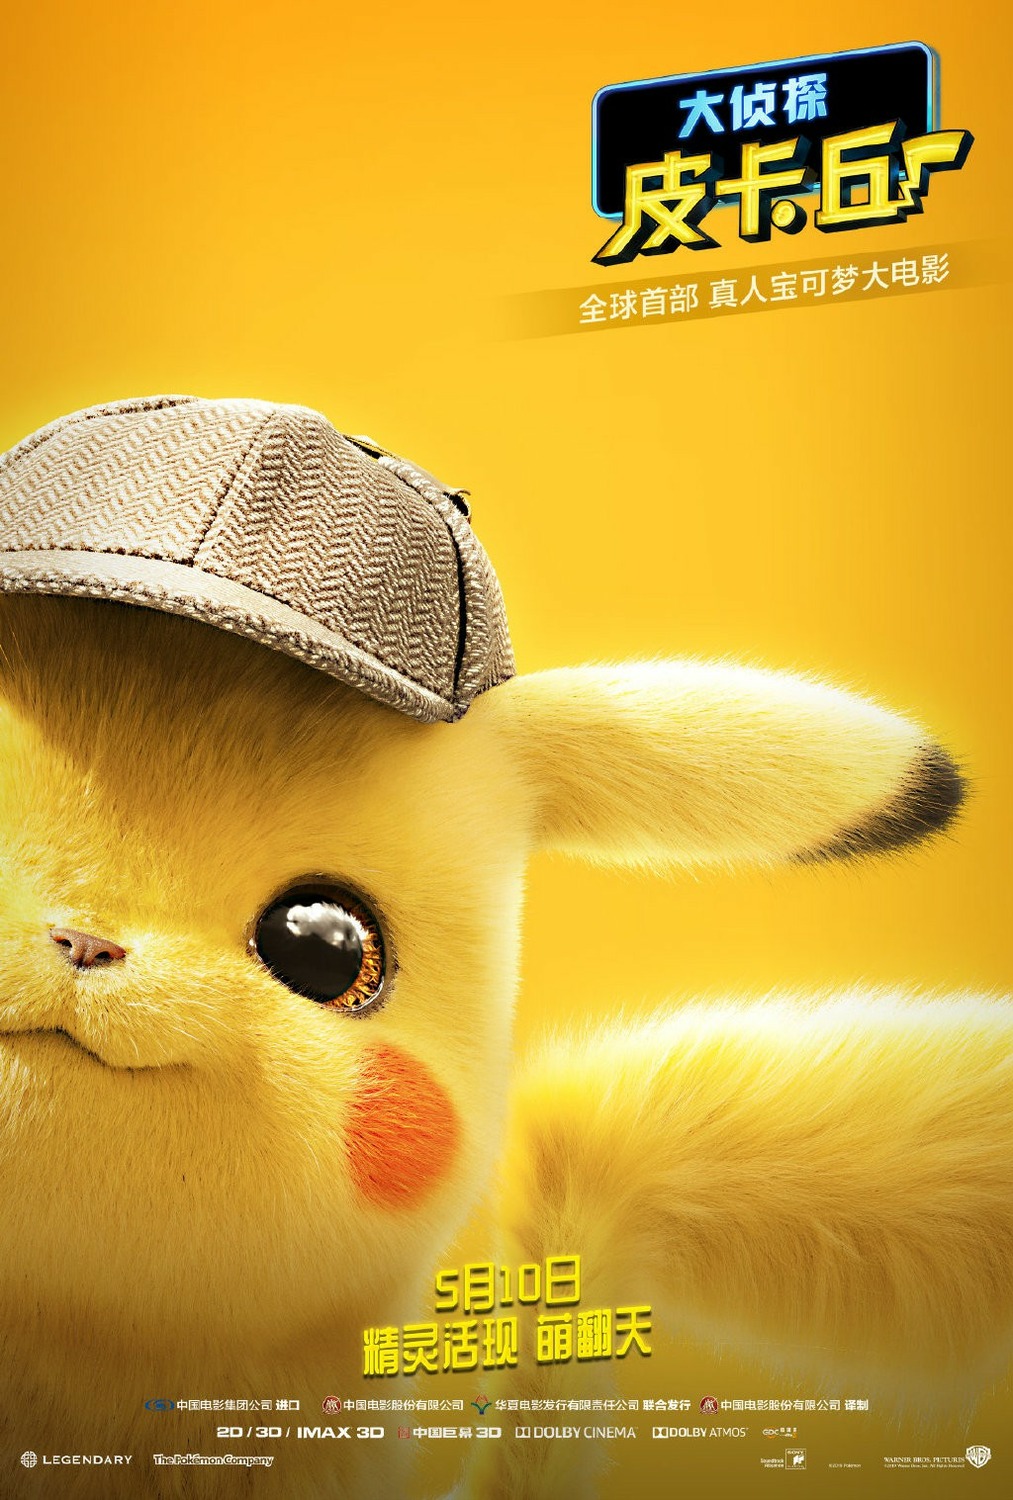 Extra Large Movie Poster Image for Pokémon Detective Pikachu (#15 of 26)